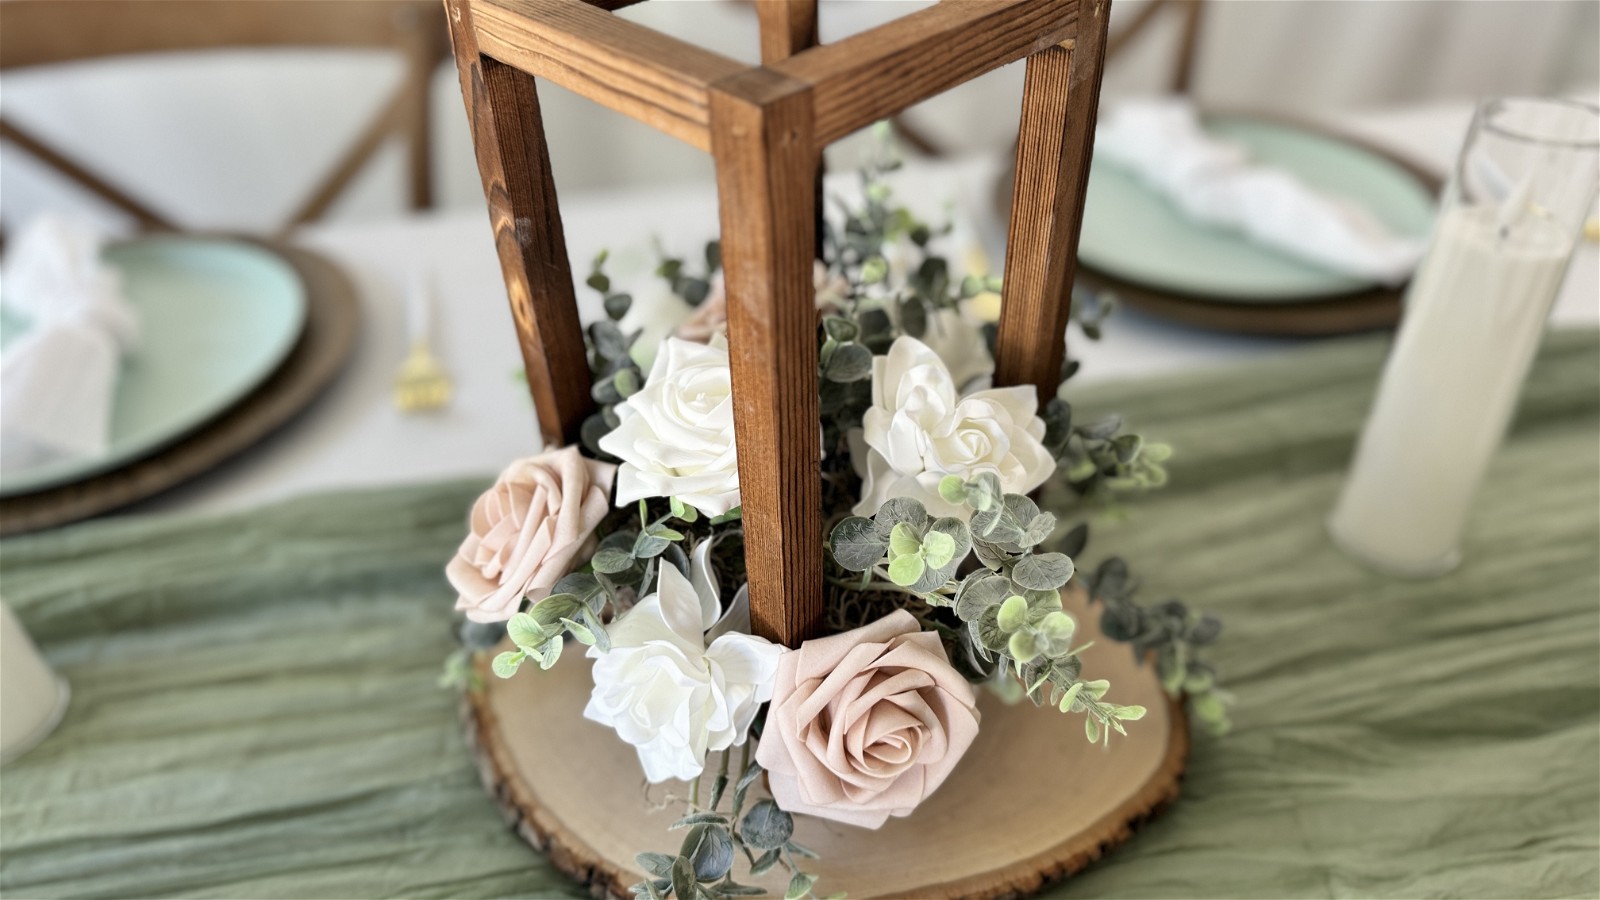 Image of Floral Lantern Without A Candle - DIY Wedding Centerpiece Step-by-Step Instructions and Tutorial